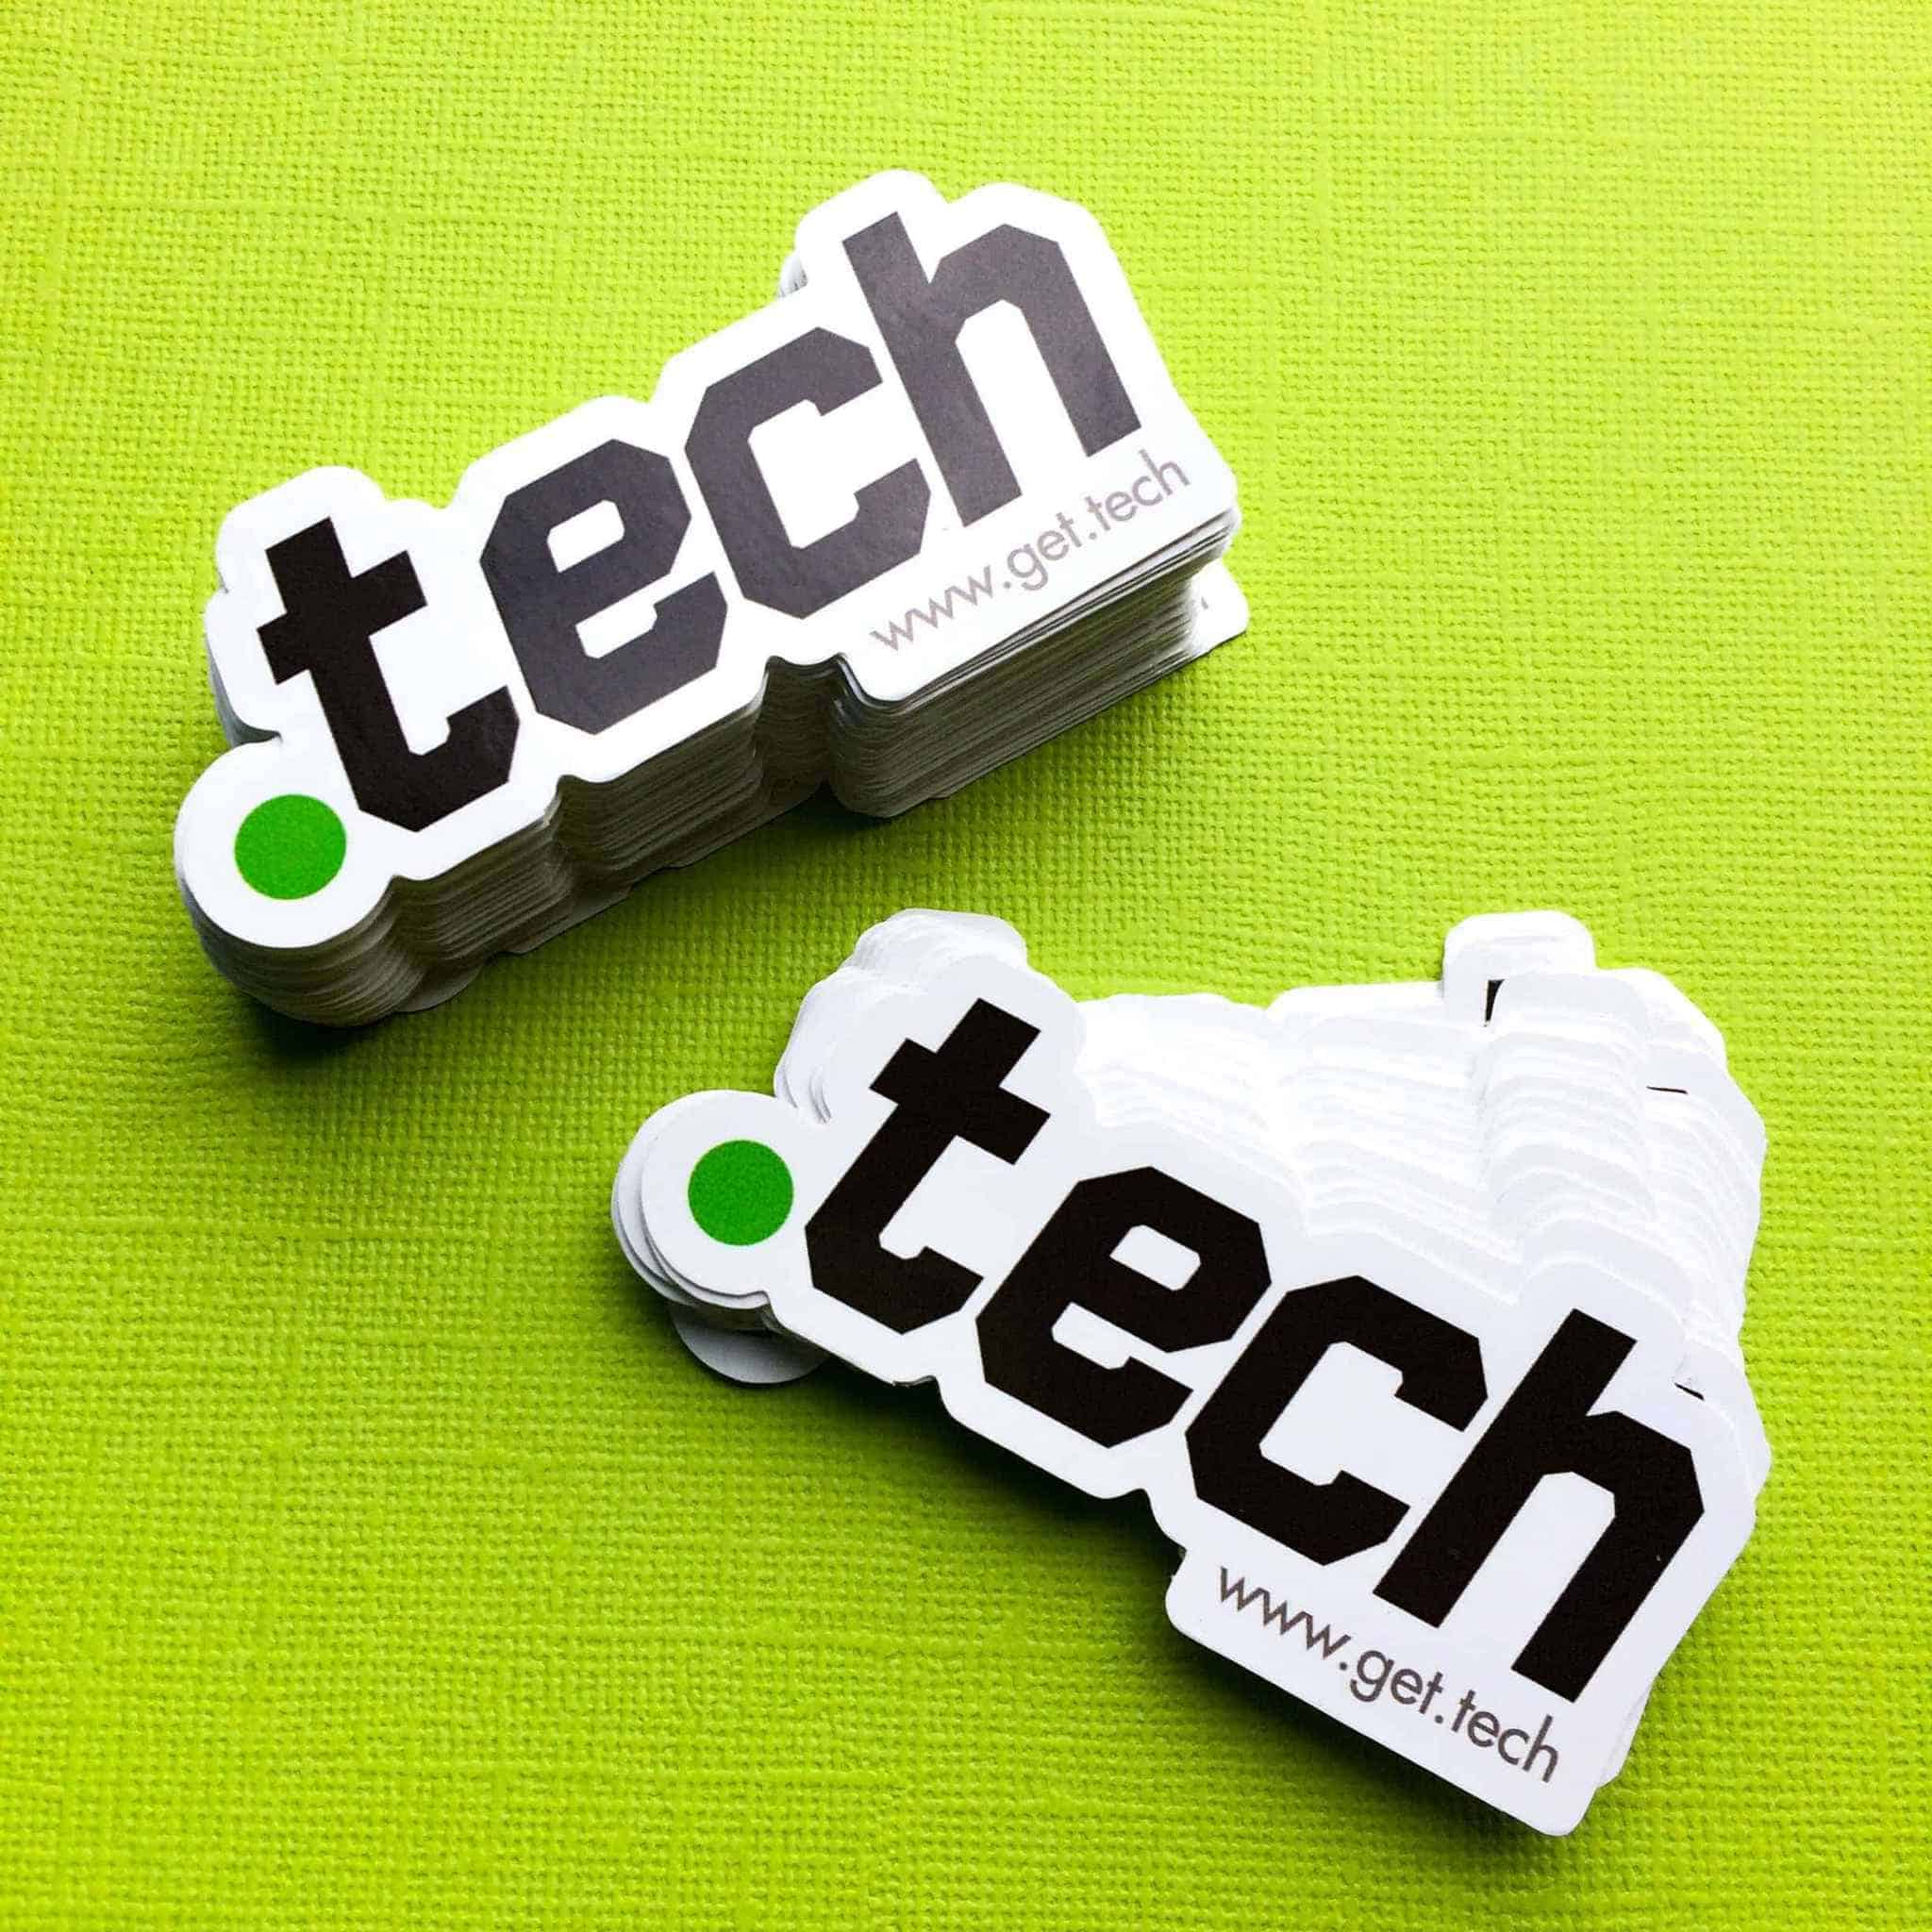 Promote your new tech startup company with stickers